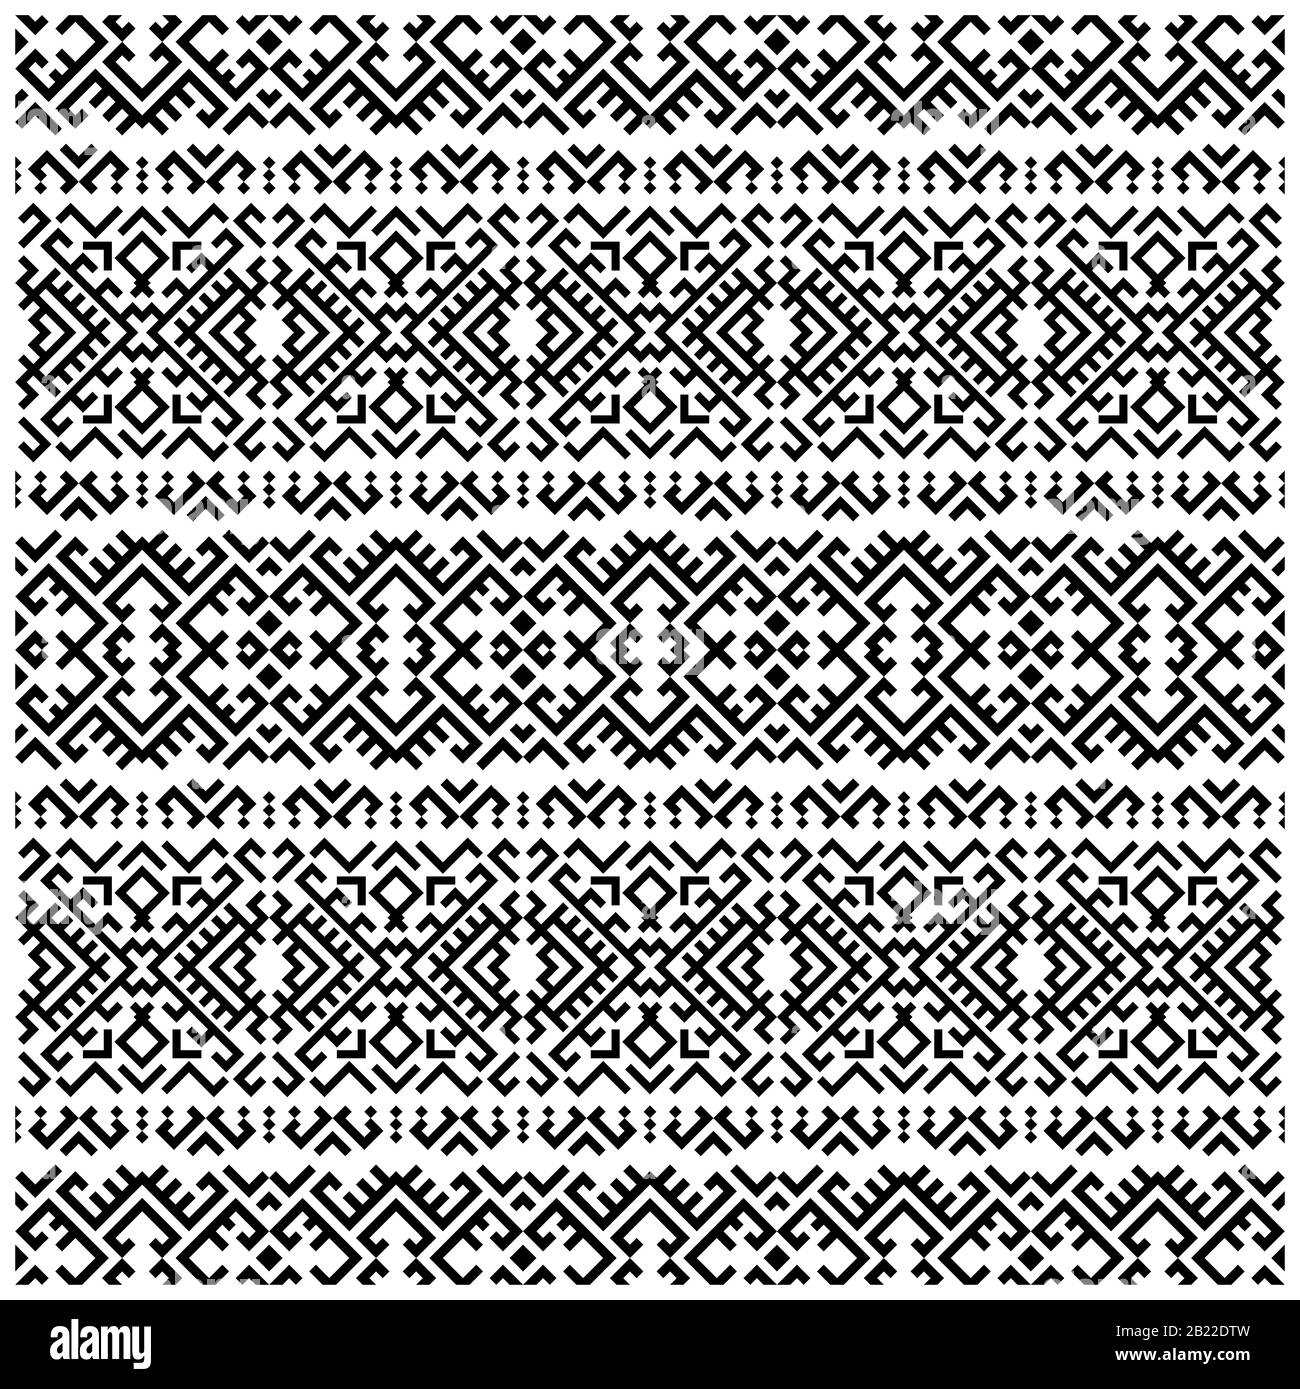 Moroccan Vector seamless pattern, abstract geometric background illustration, fabric textile pattern persian motifs Stock Photo